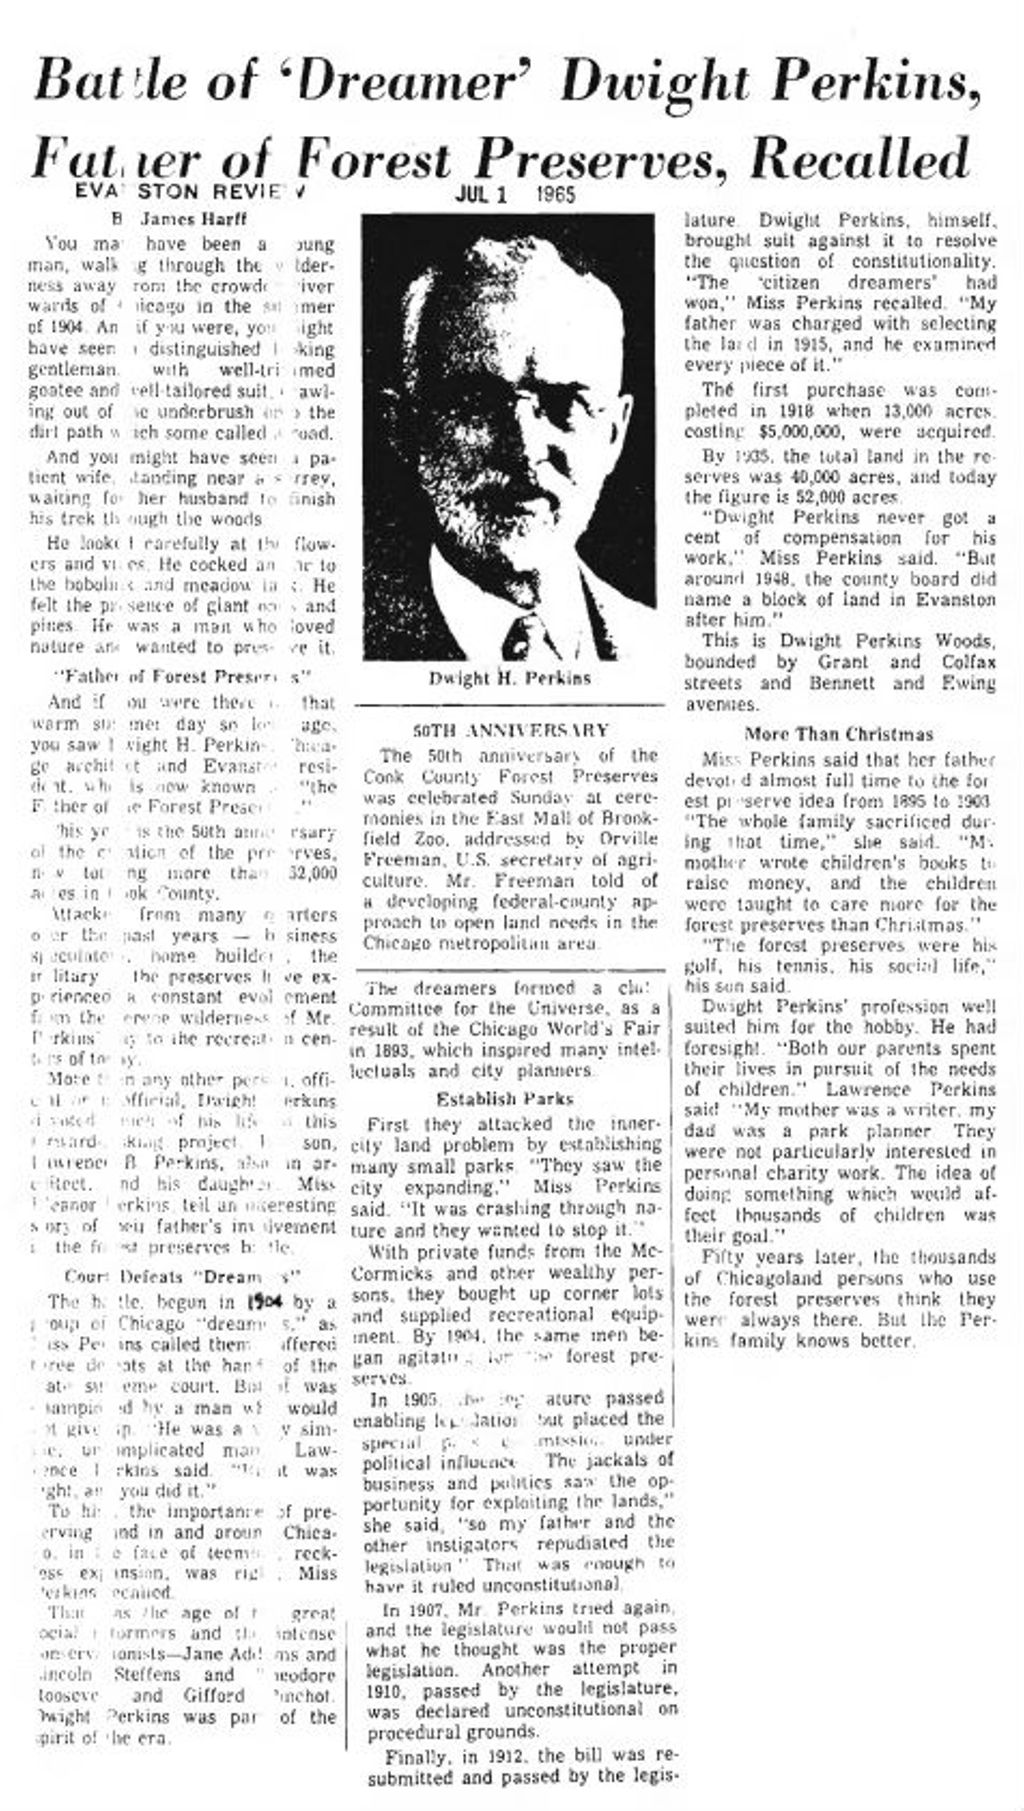 Article on Dwight Perkins, Evanston Review, 1965